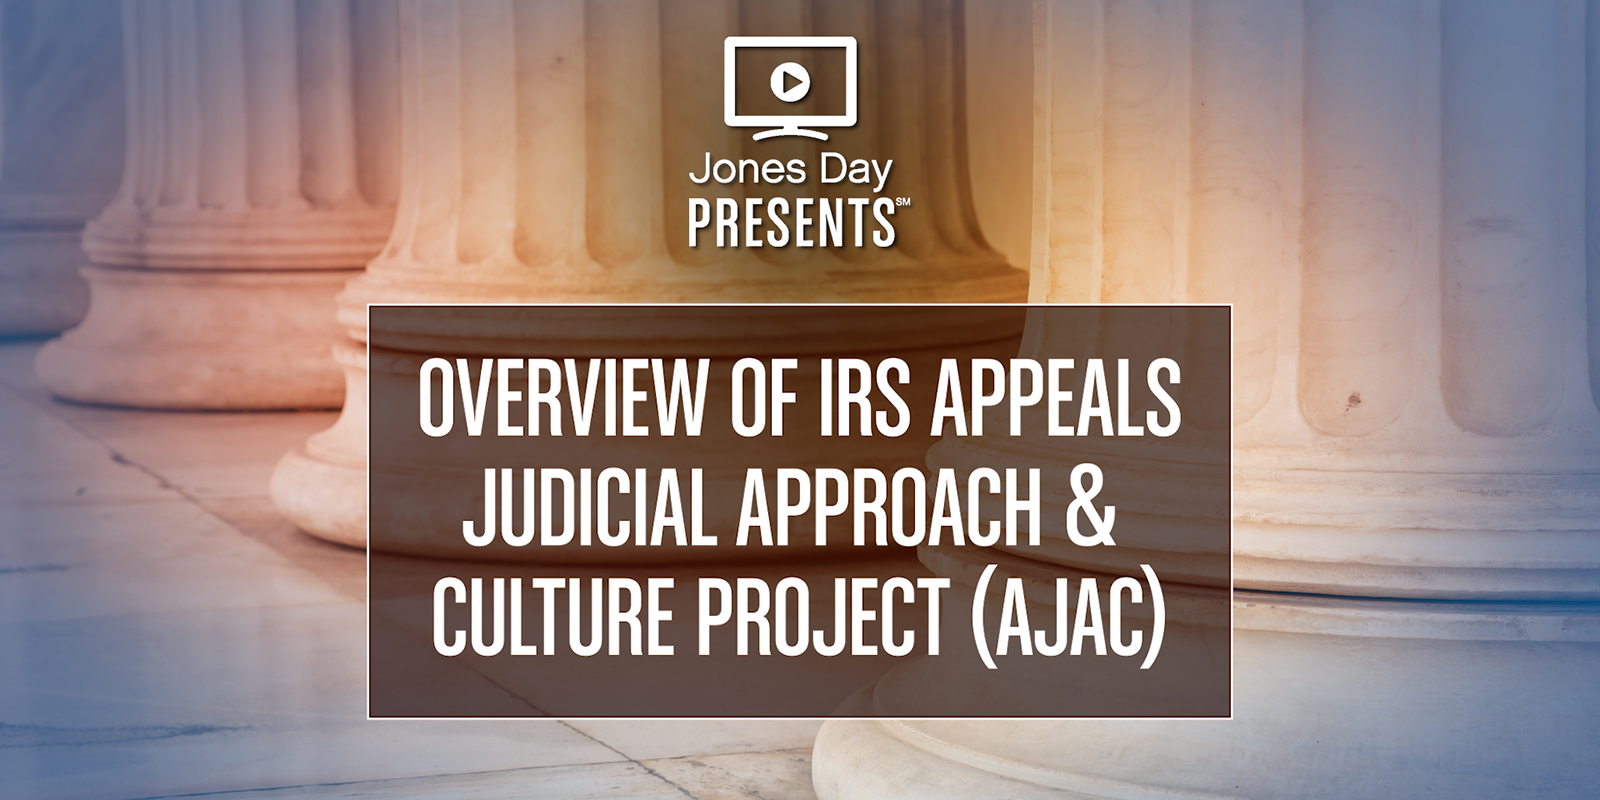 Overview of IRS Appeals